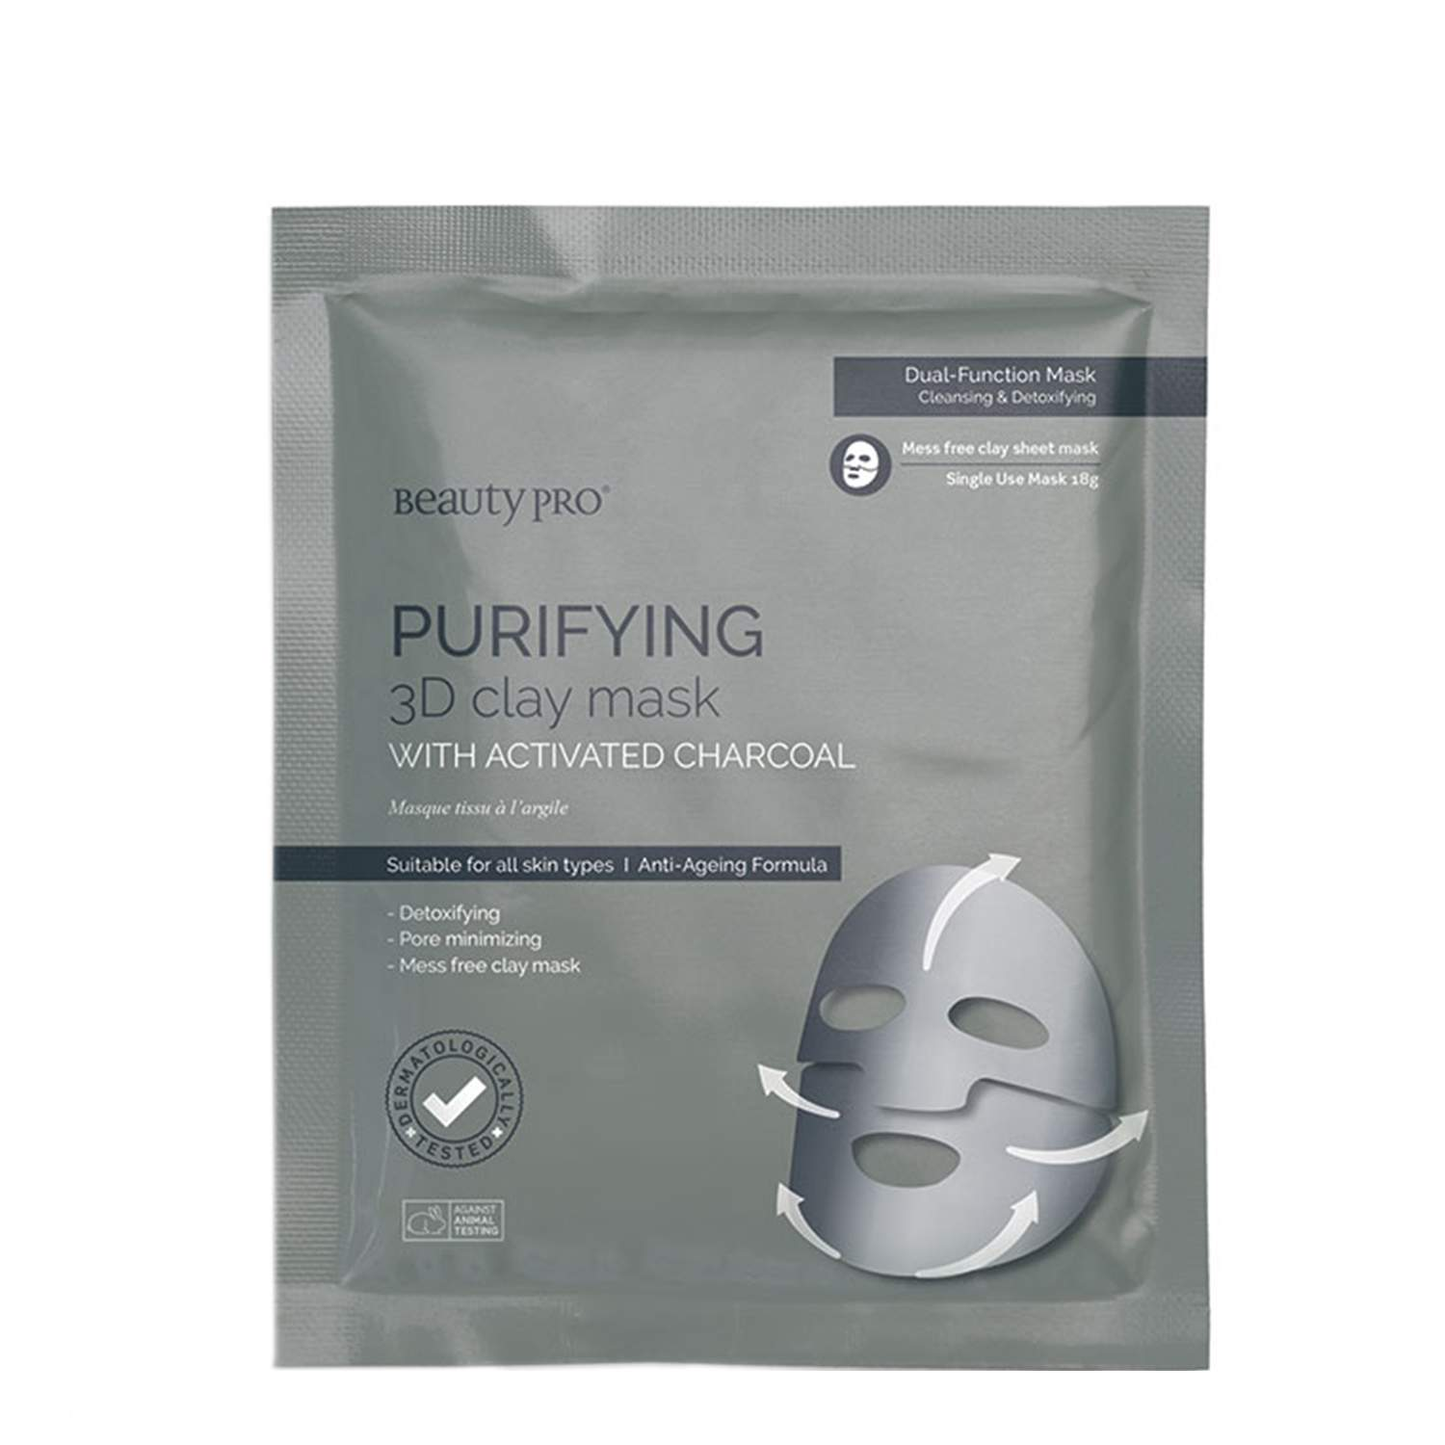 BeautyPro PURIFYING 3D Clay Mask with Activated Charcoal